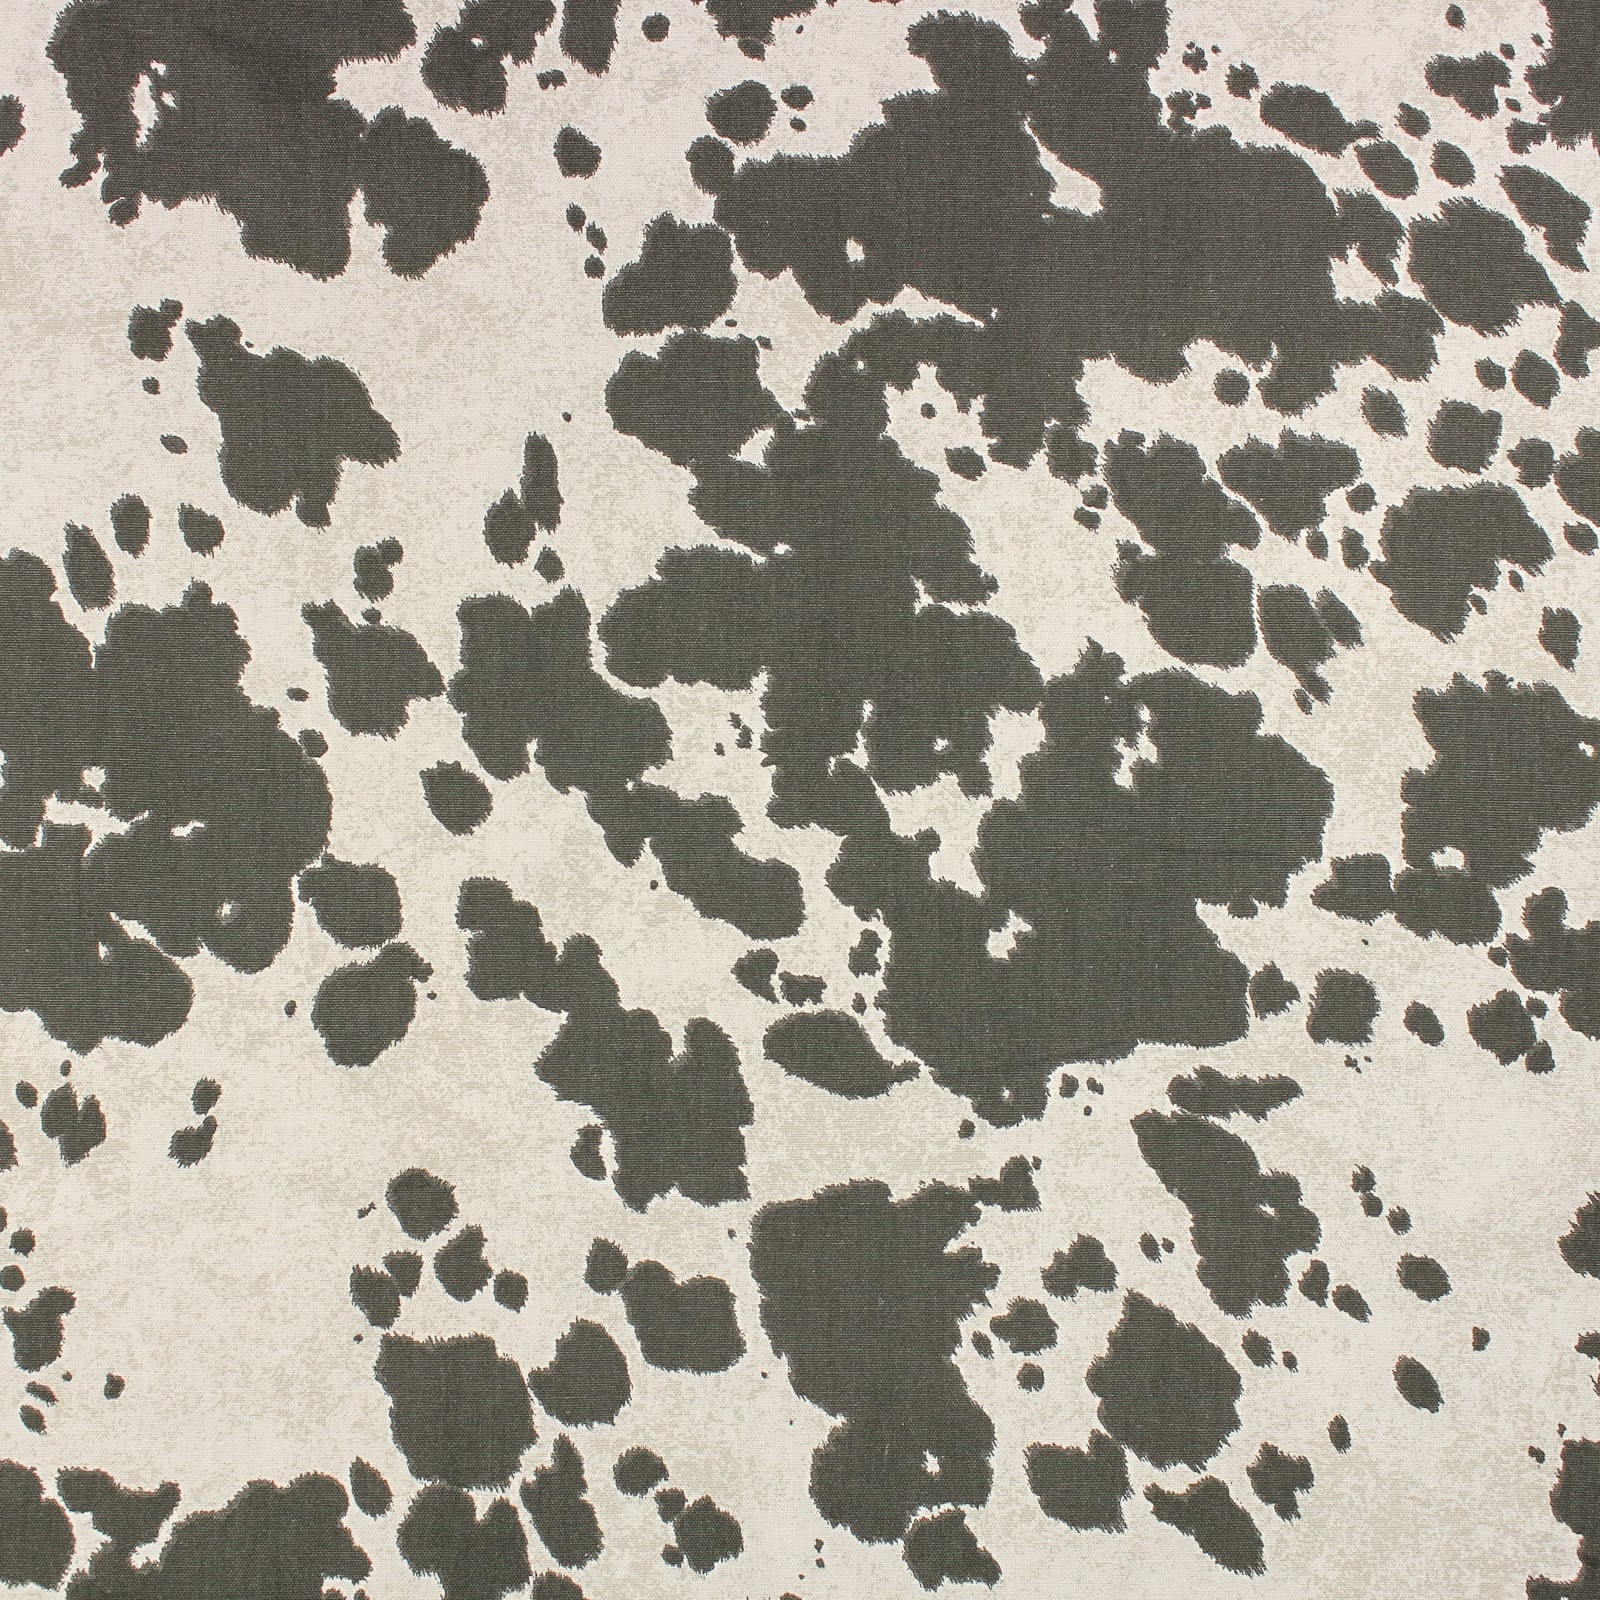 Find The Richloom Gray Cowhide Cotton Home Decor Fabric At